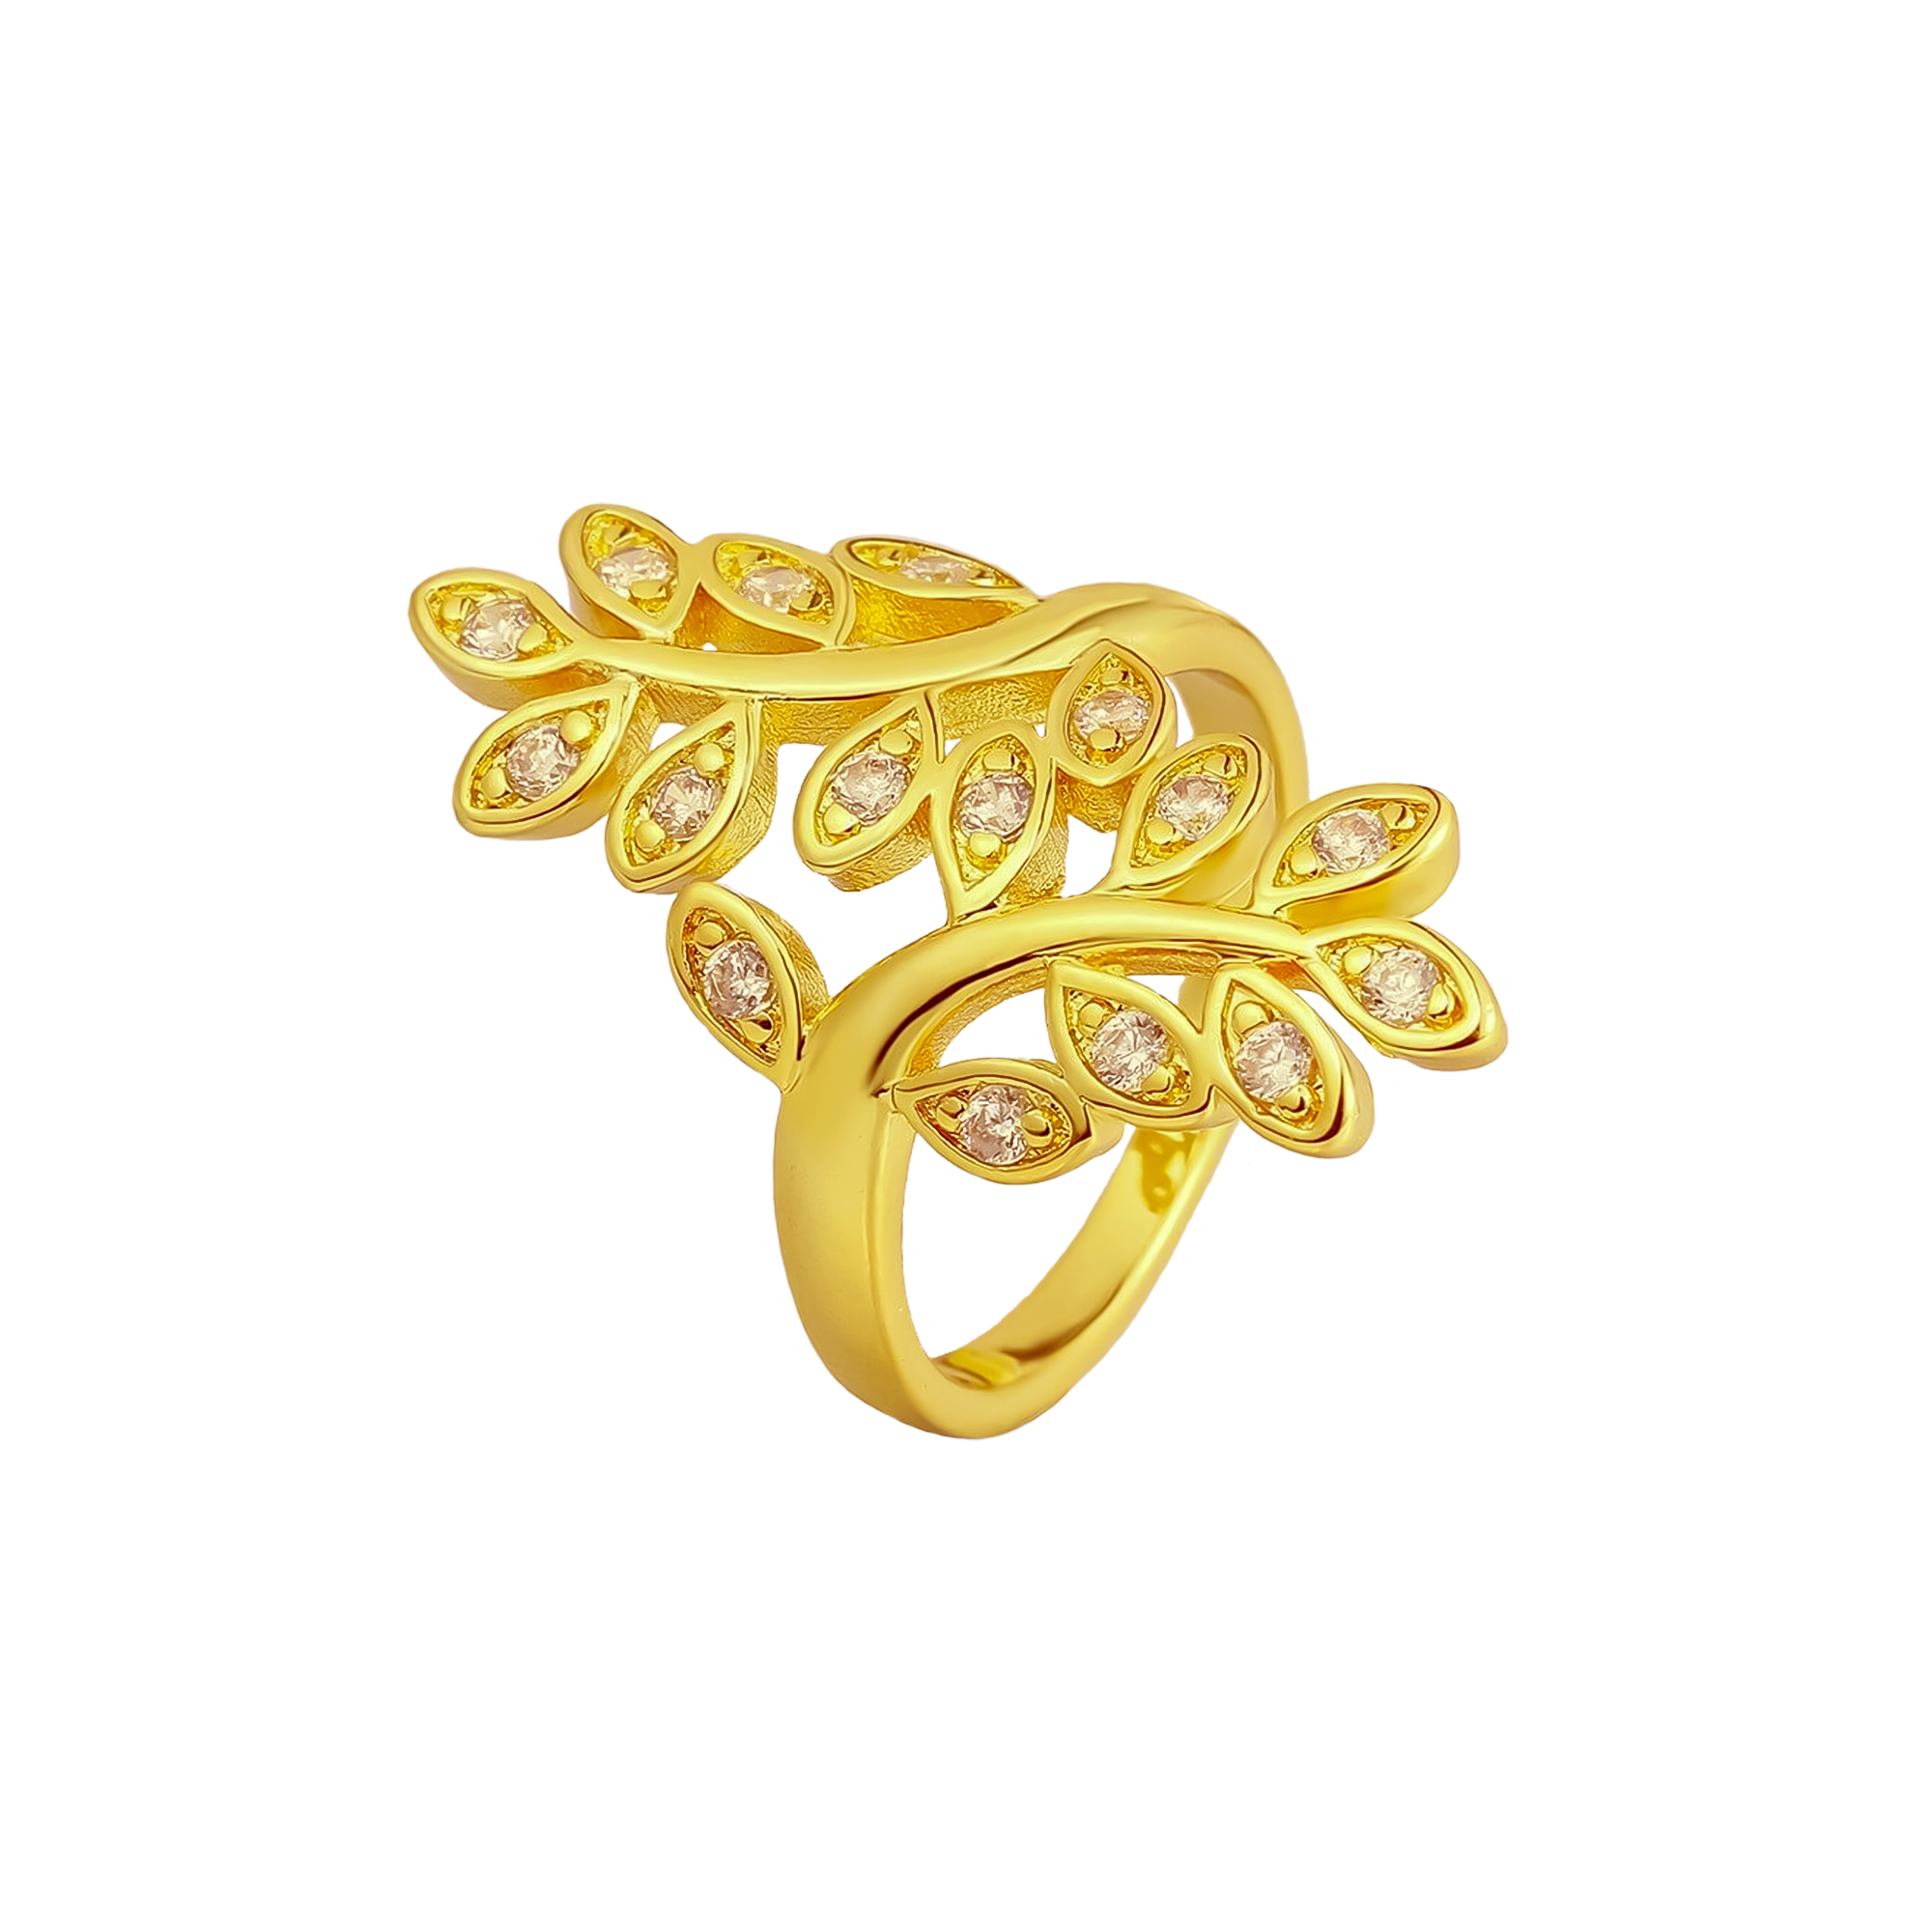 Latest Light weight Gold Ring Design Collection with weight and price -  YouTube | Latest gold ring designs, Gold ring designs, Gold jewelry outfits